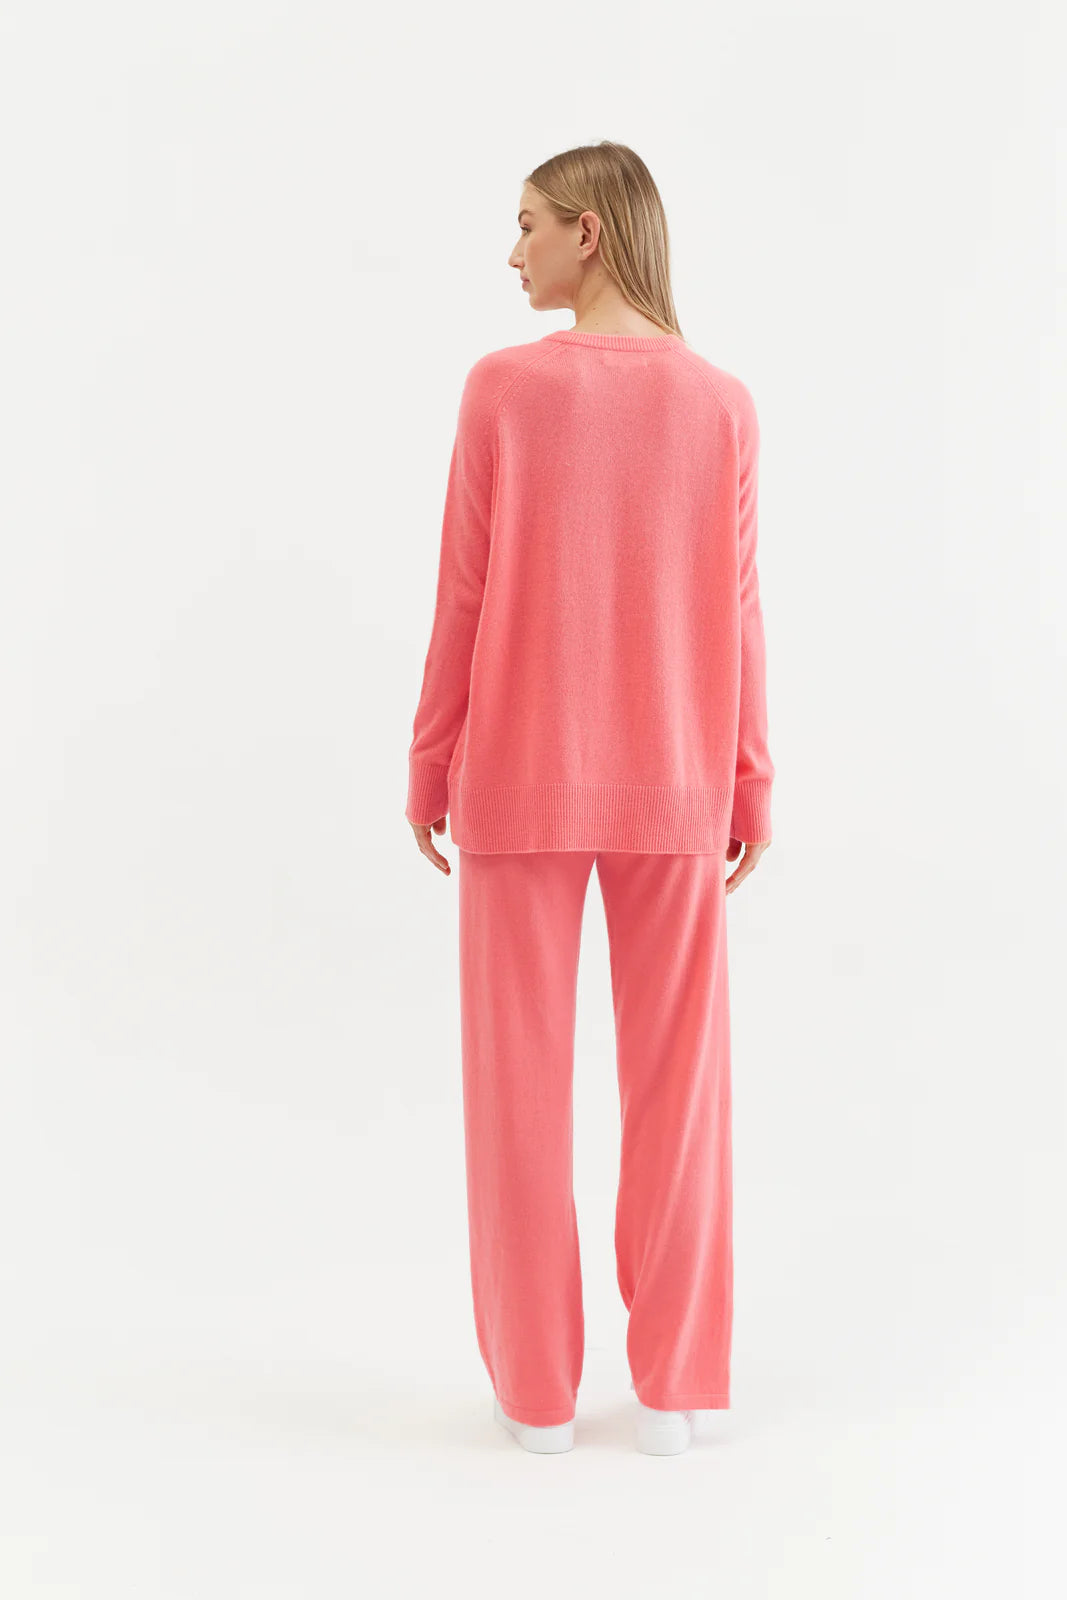 Summer Slouchy Cashmere Sweater - Coral